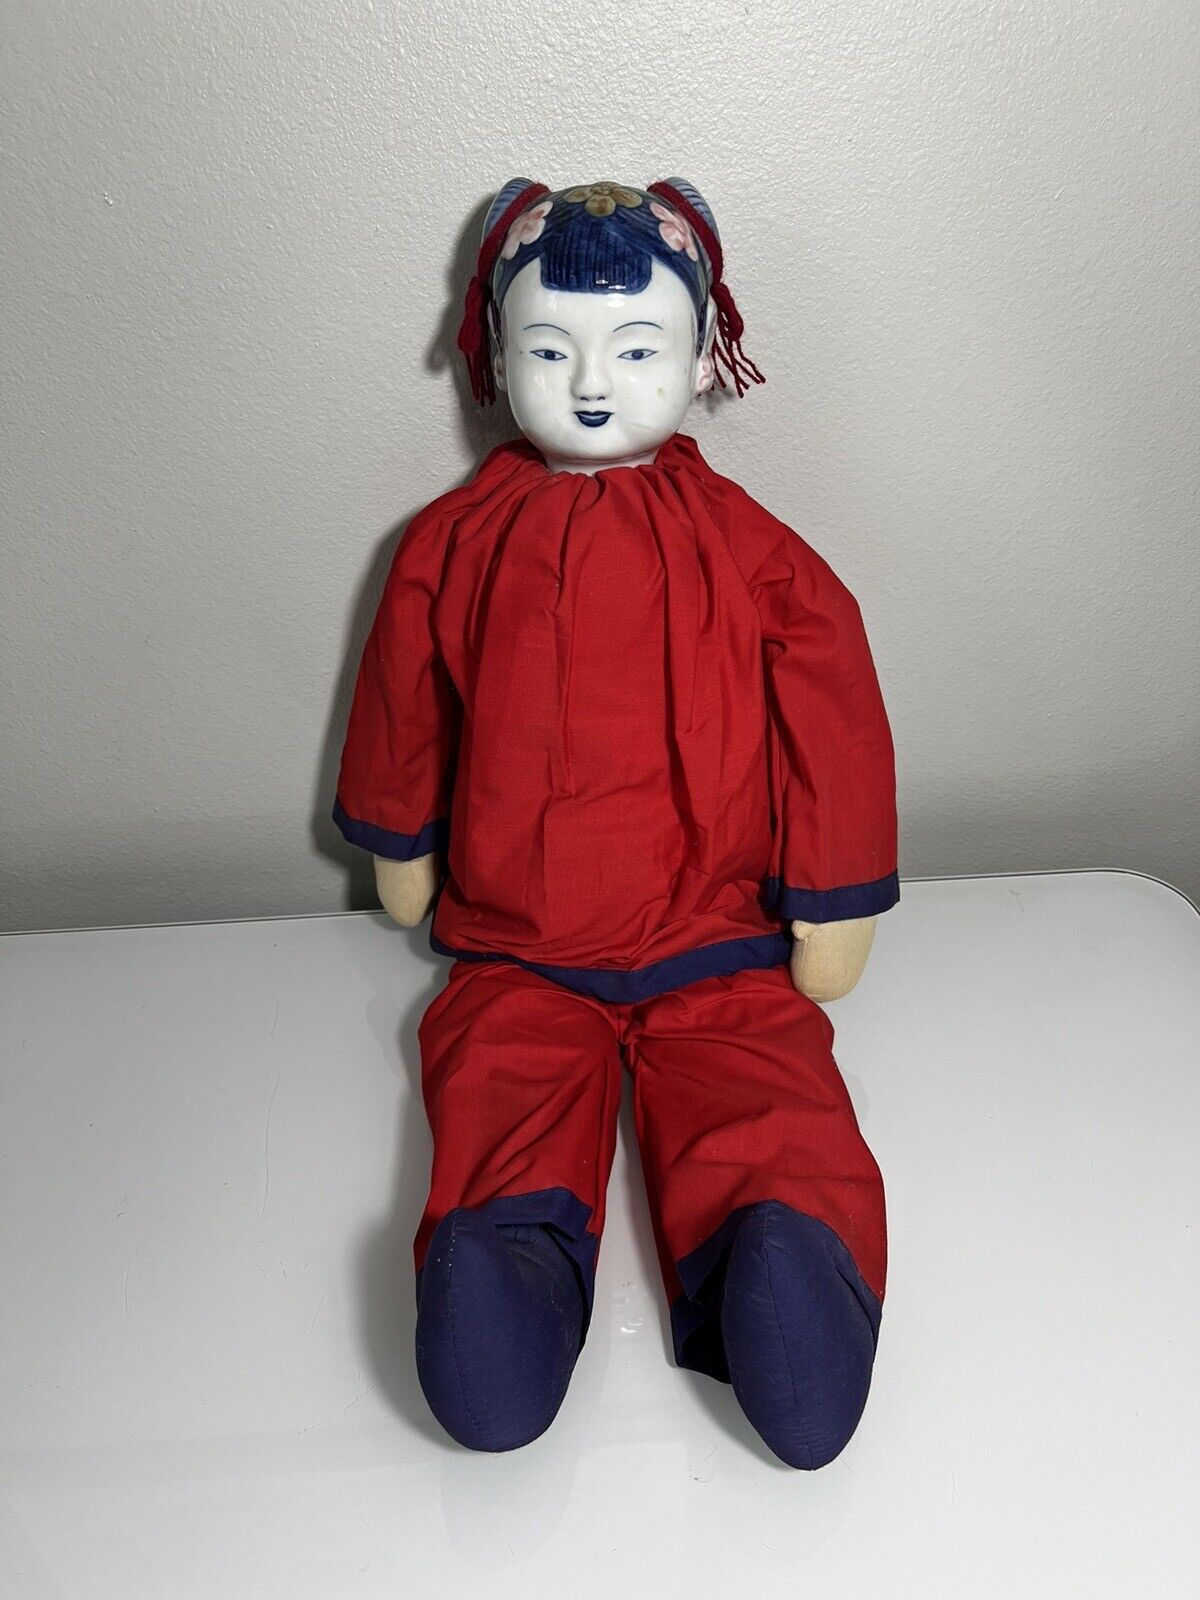 Vintage Large Traditional Chinese Asian Lady Porcelain Head Cloth Body Doll 25”